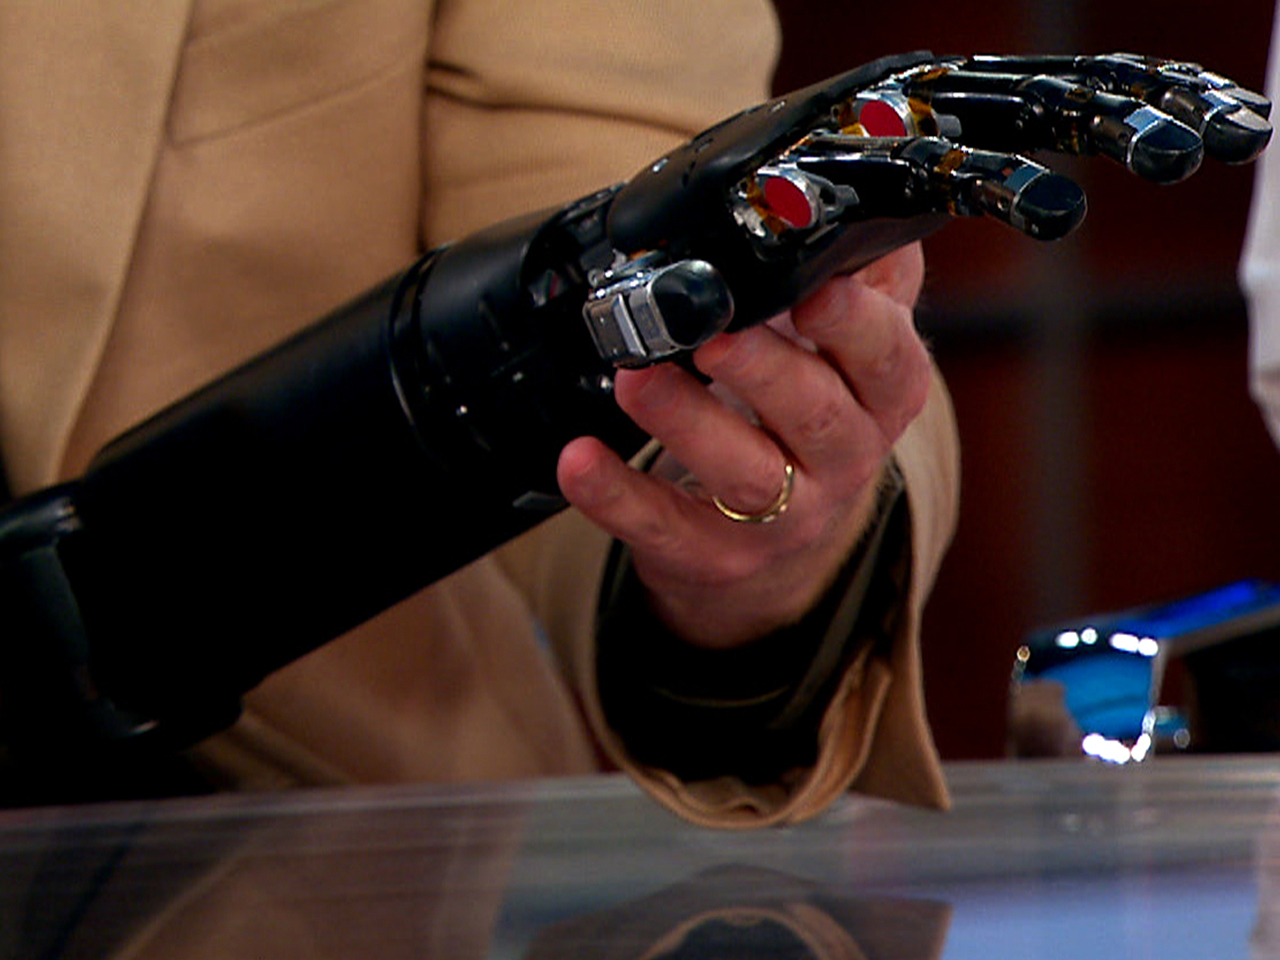 Bionic arm researchers aim for 50K to 60K price, product release "in